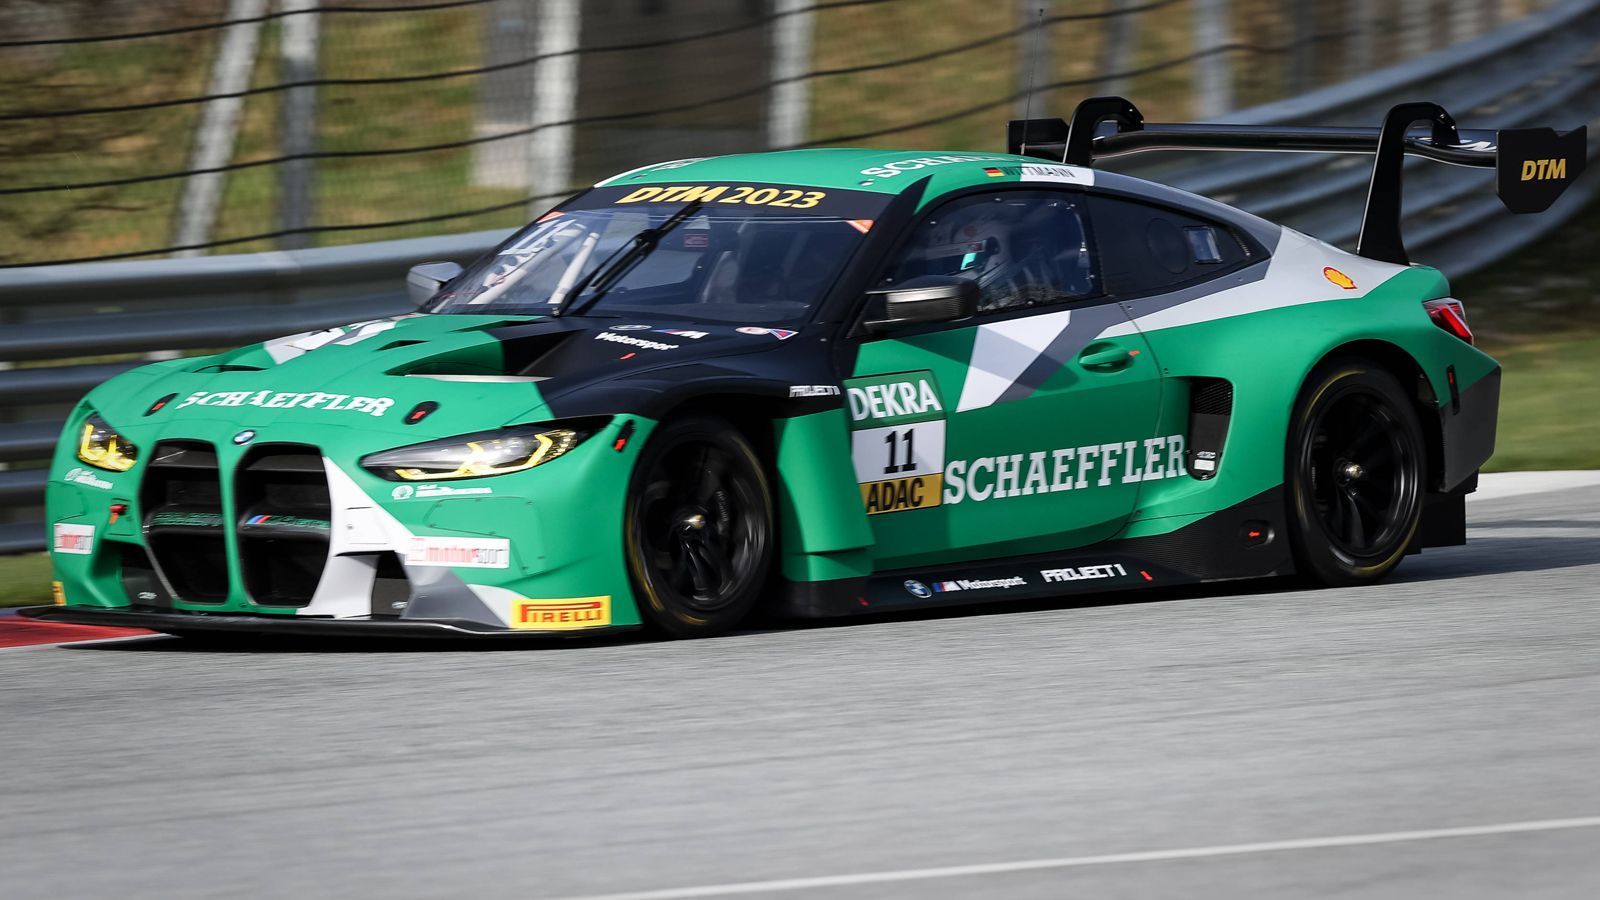 
                <strong>Marco Wittmann</strong><br>
                &#x2022; Team: Project 1<br>&#x2022; Marke: BMW<br>&#x2022; Auto: BMW M4 GT3<br>&#x2022; Startnummer: 11<br>
              